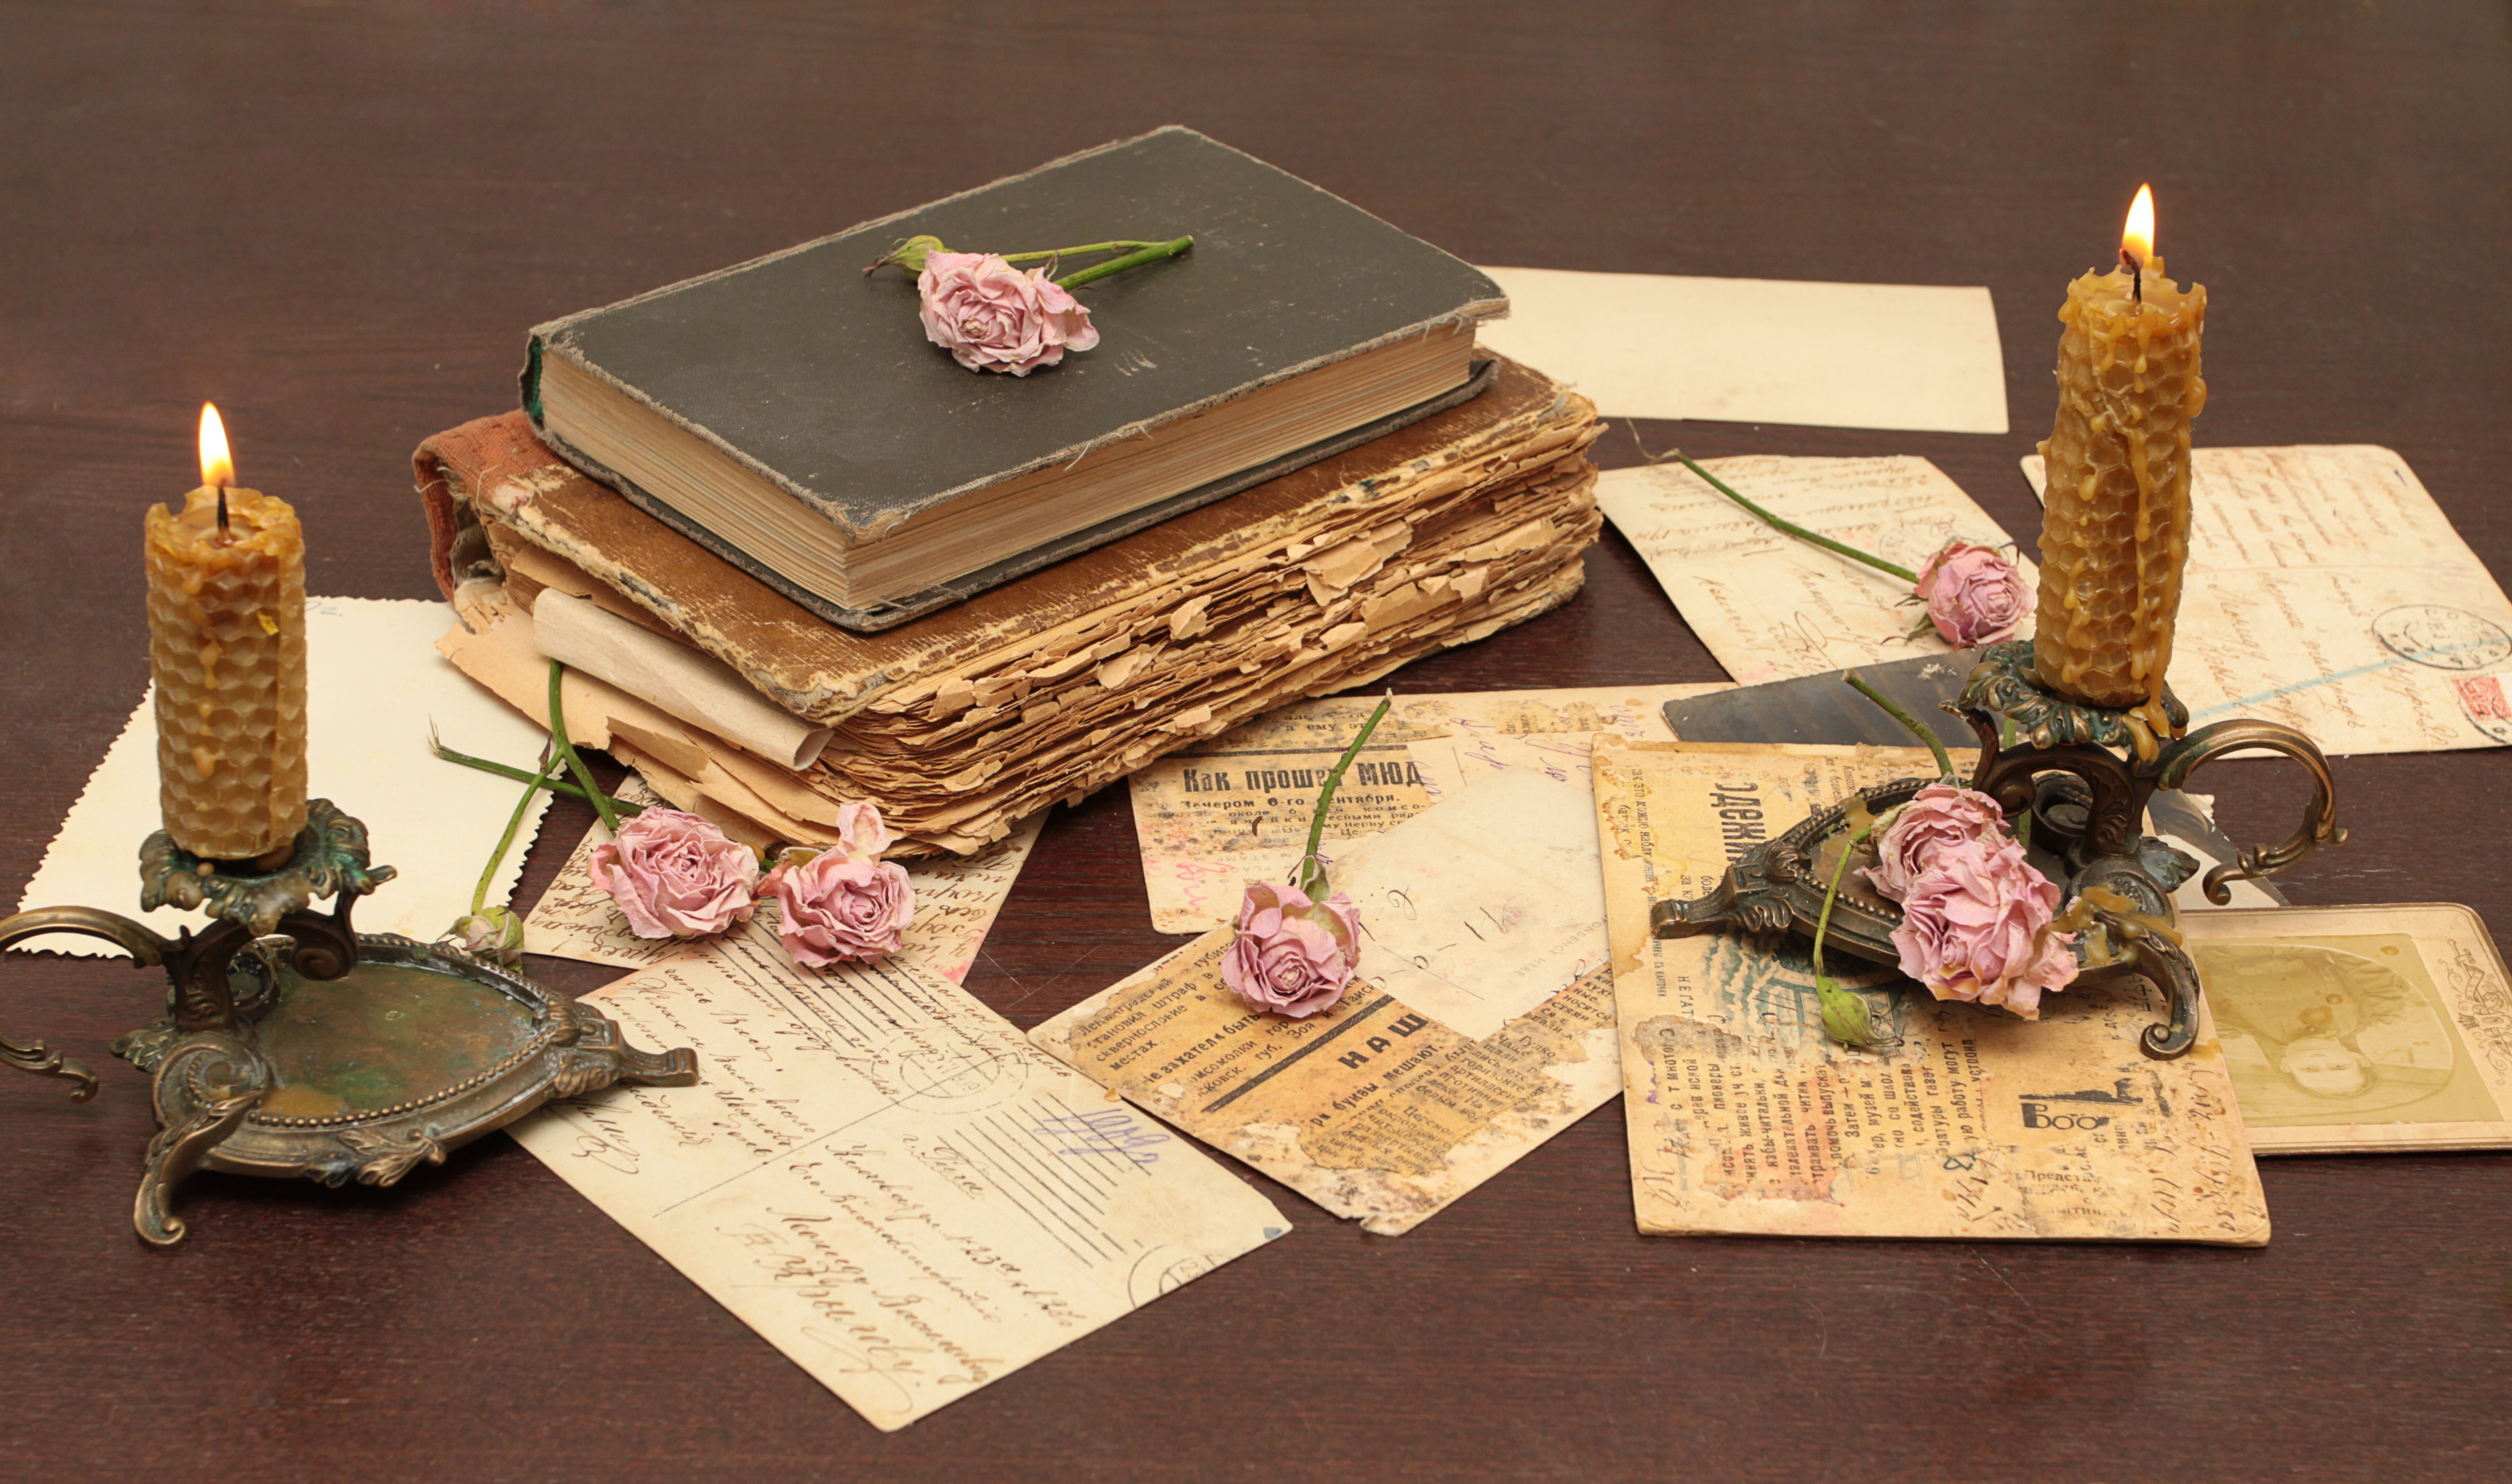 miscellaneous, old, vintage, miscellanea, books, flowers, roses, candles, postcards, table, paper, letters, candlesticks